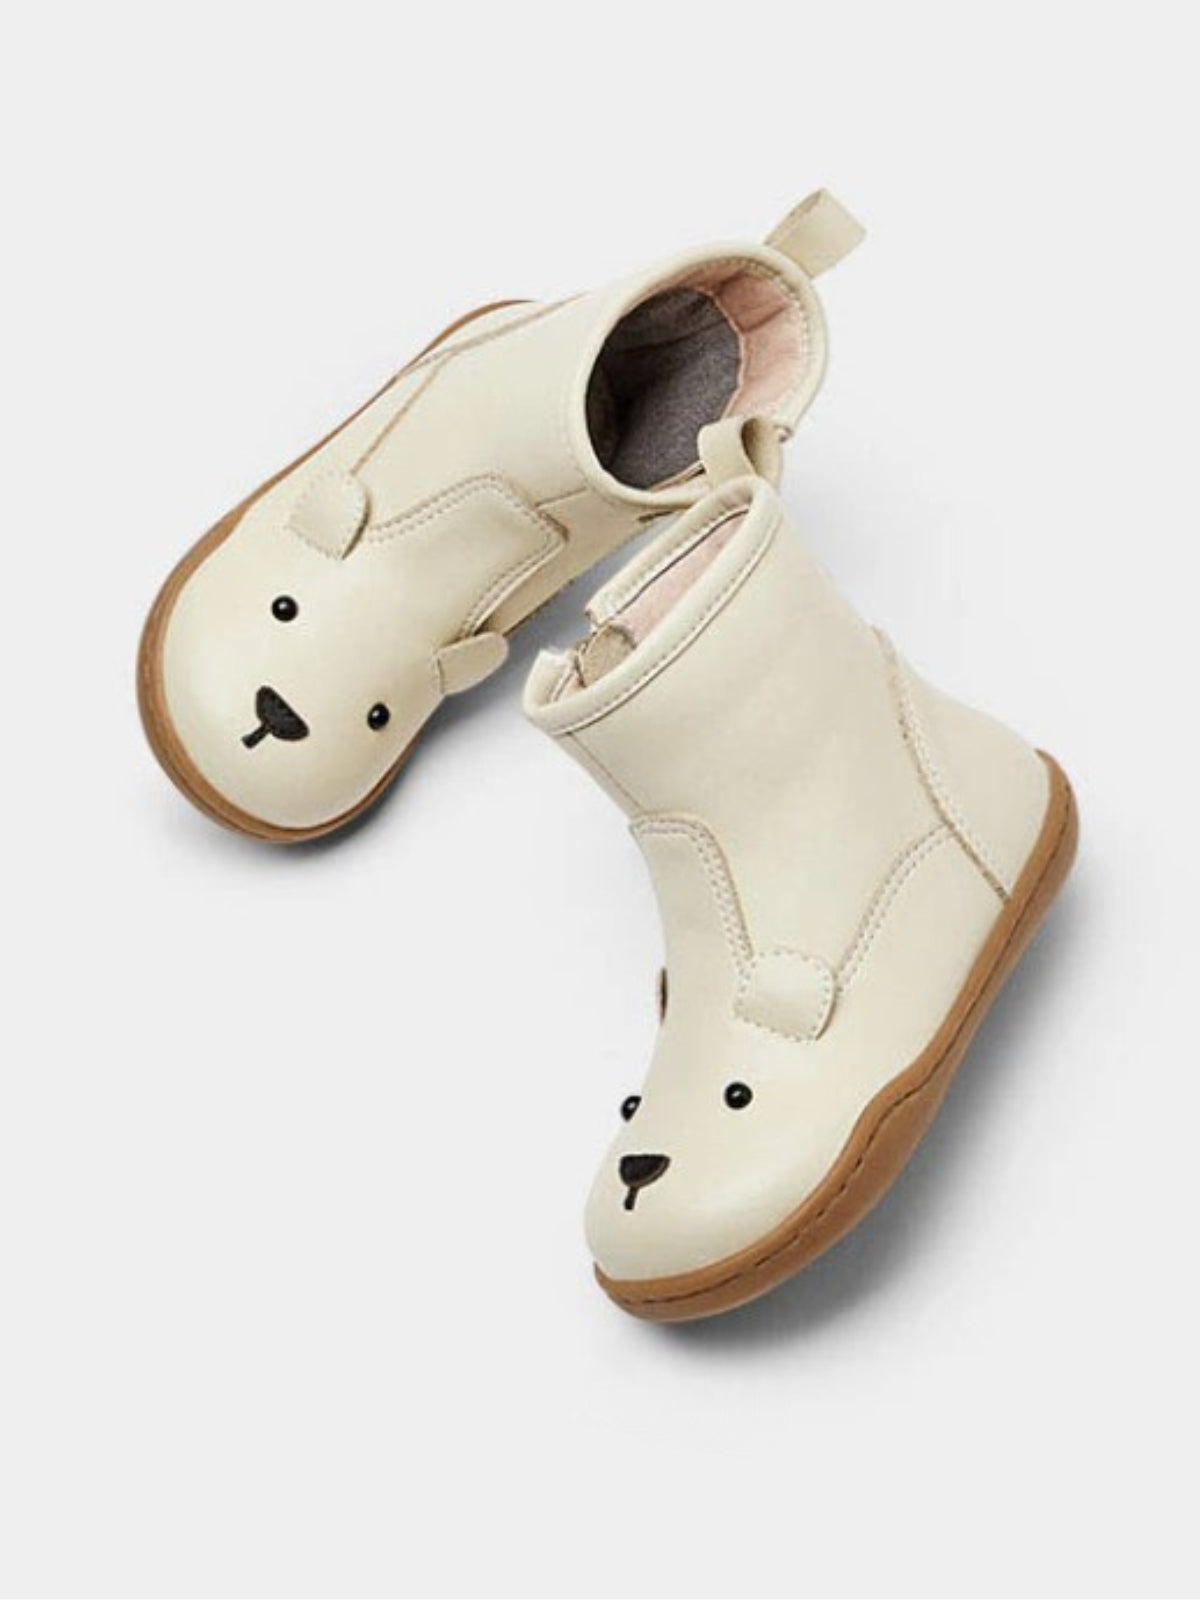 Mia Belle Girls Teddy Bear Leather Boots | Shoes By Liv & Mia